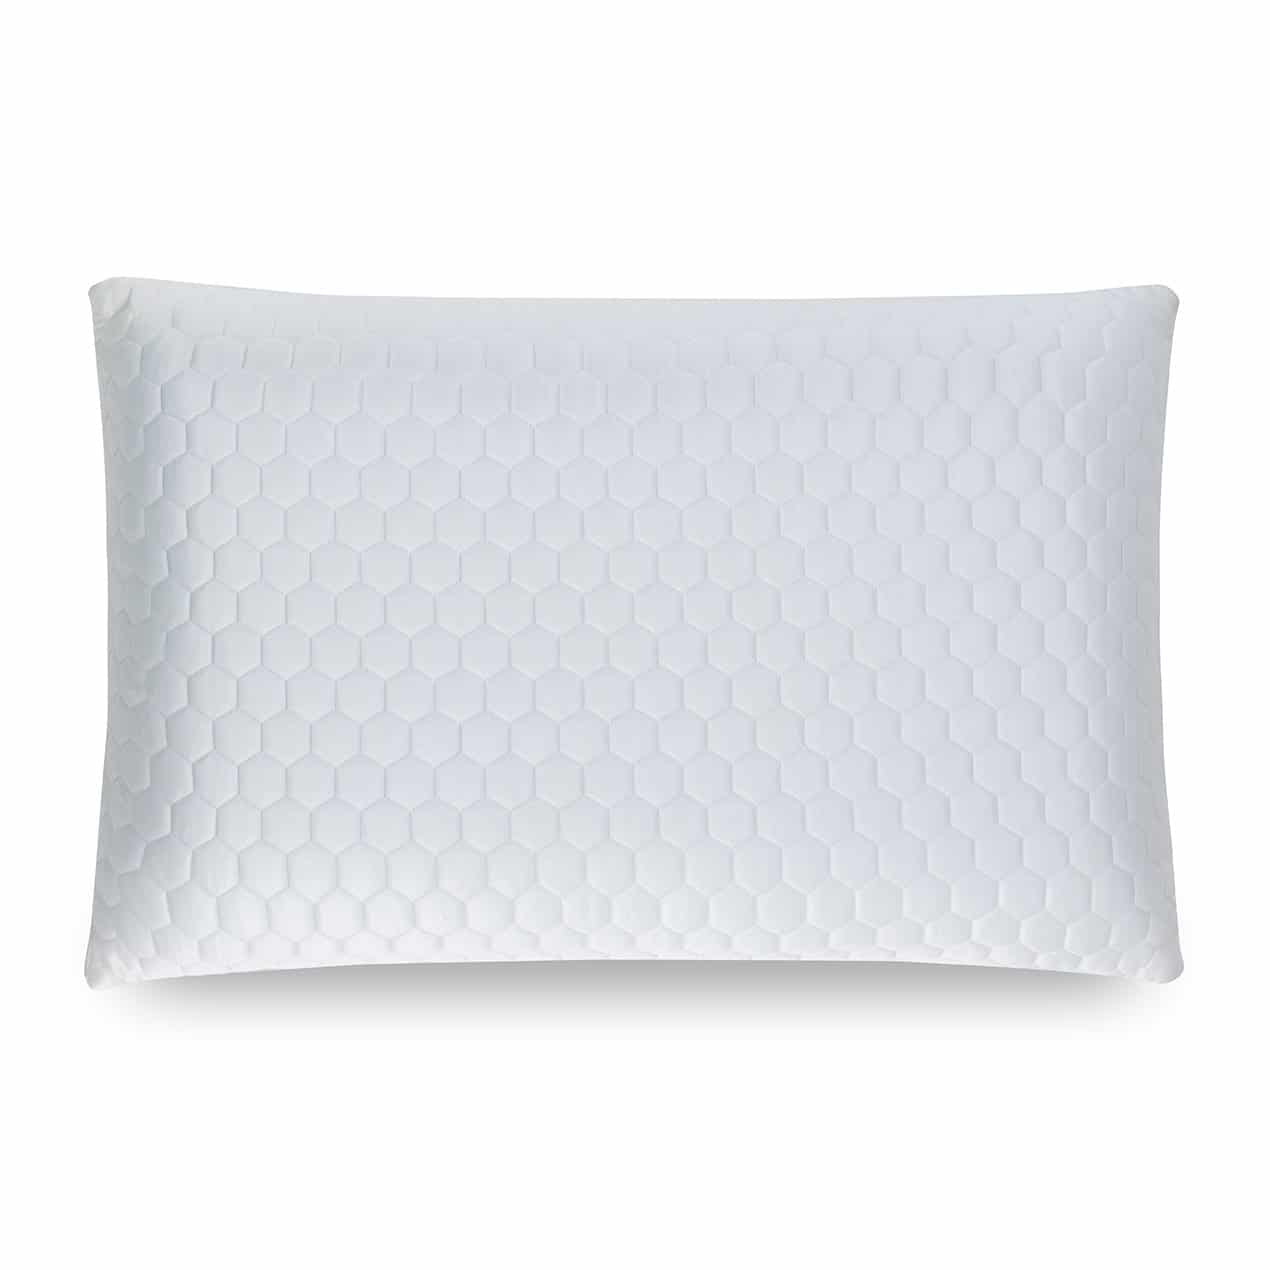 10 Best Pillows for Side Sleepers Reviewed in Detail (Feb. 2021)